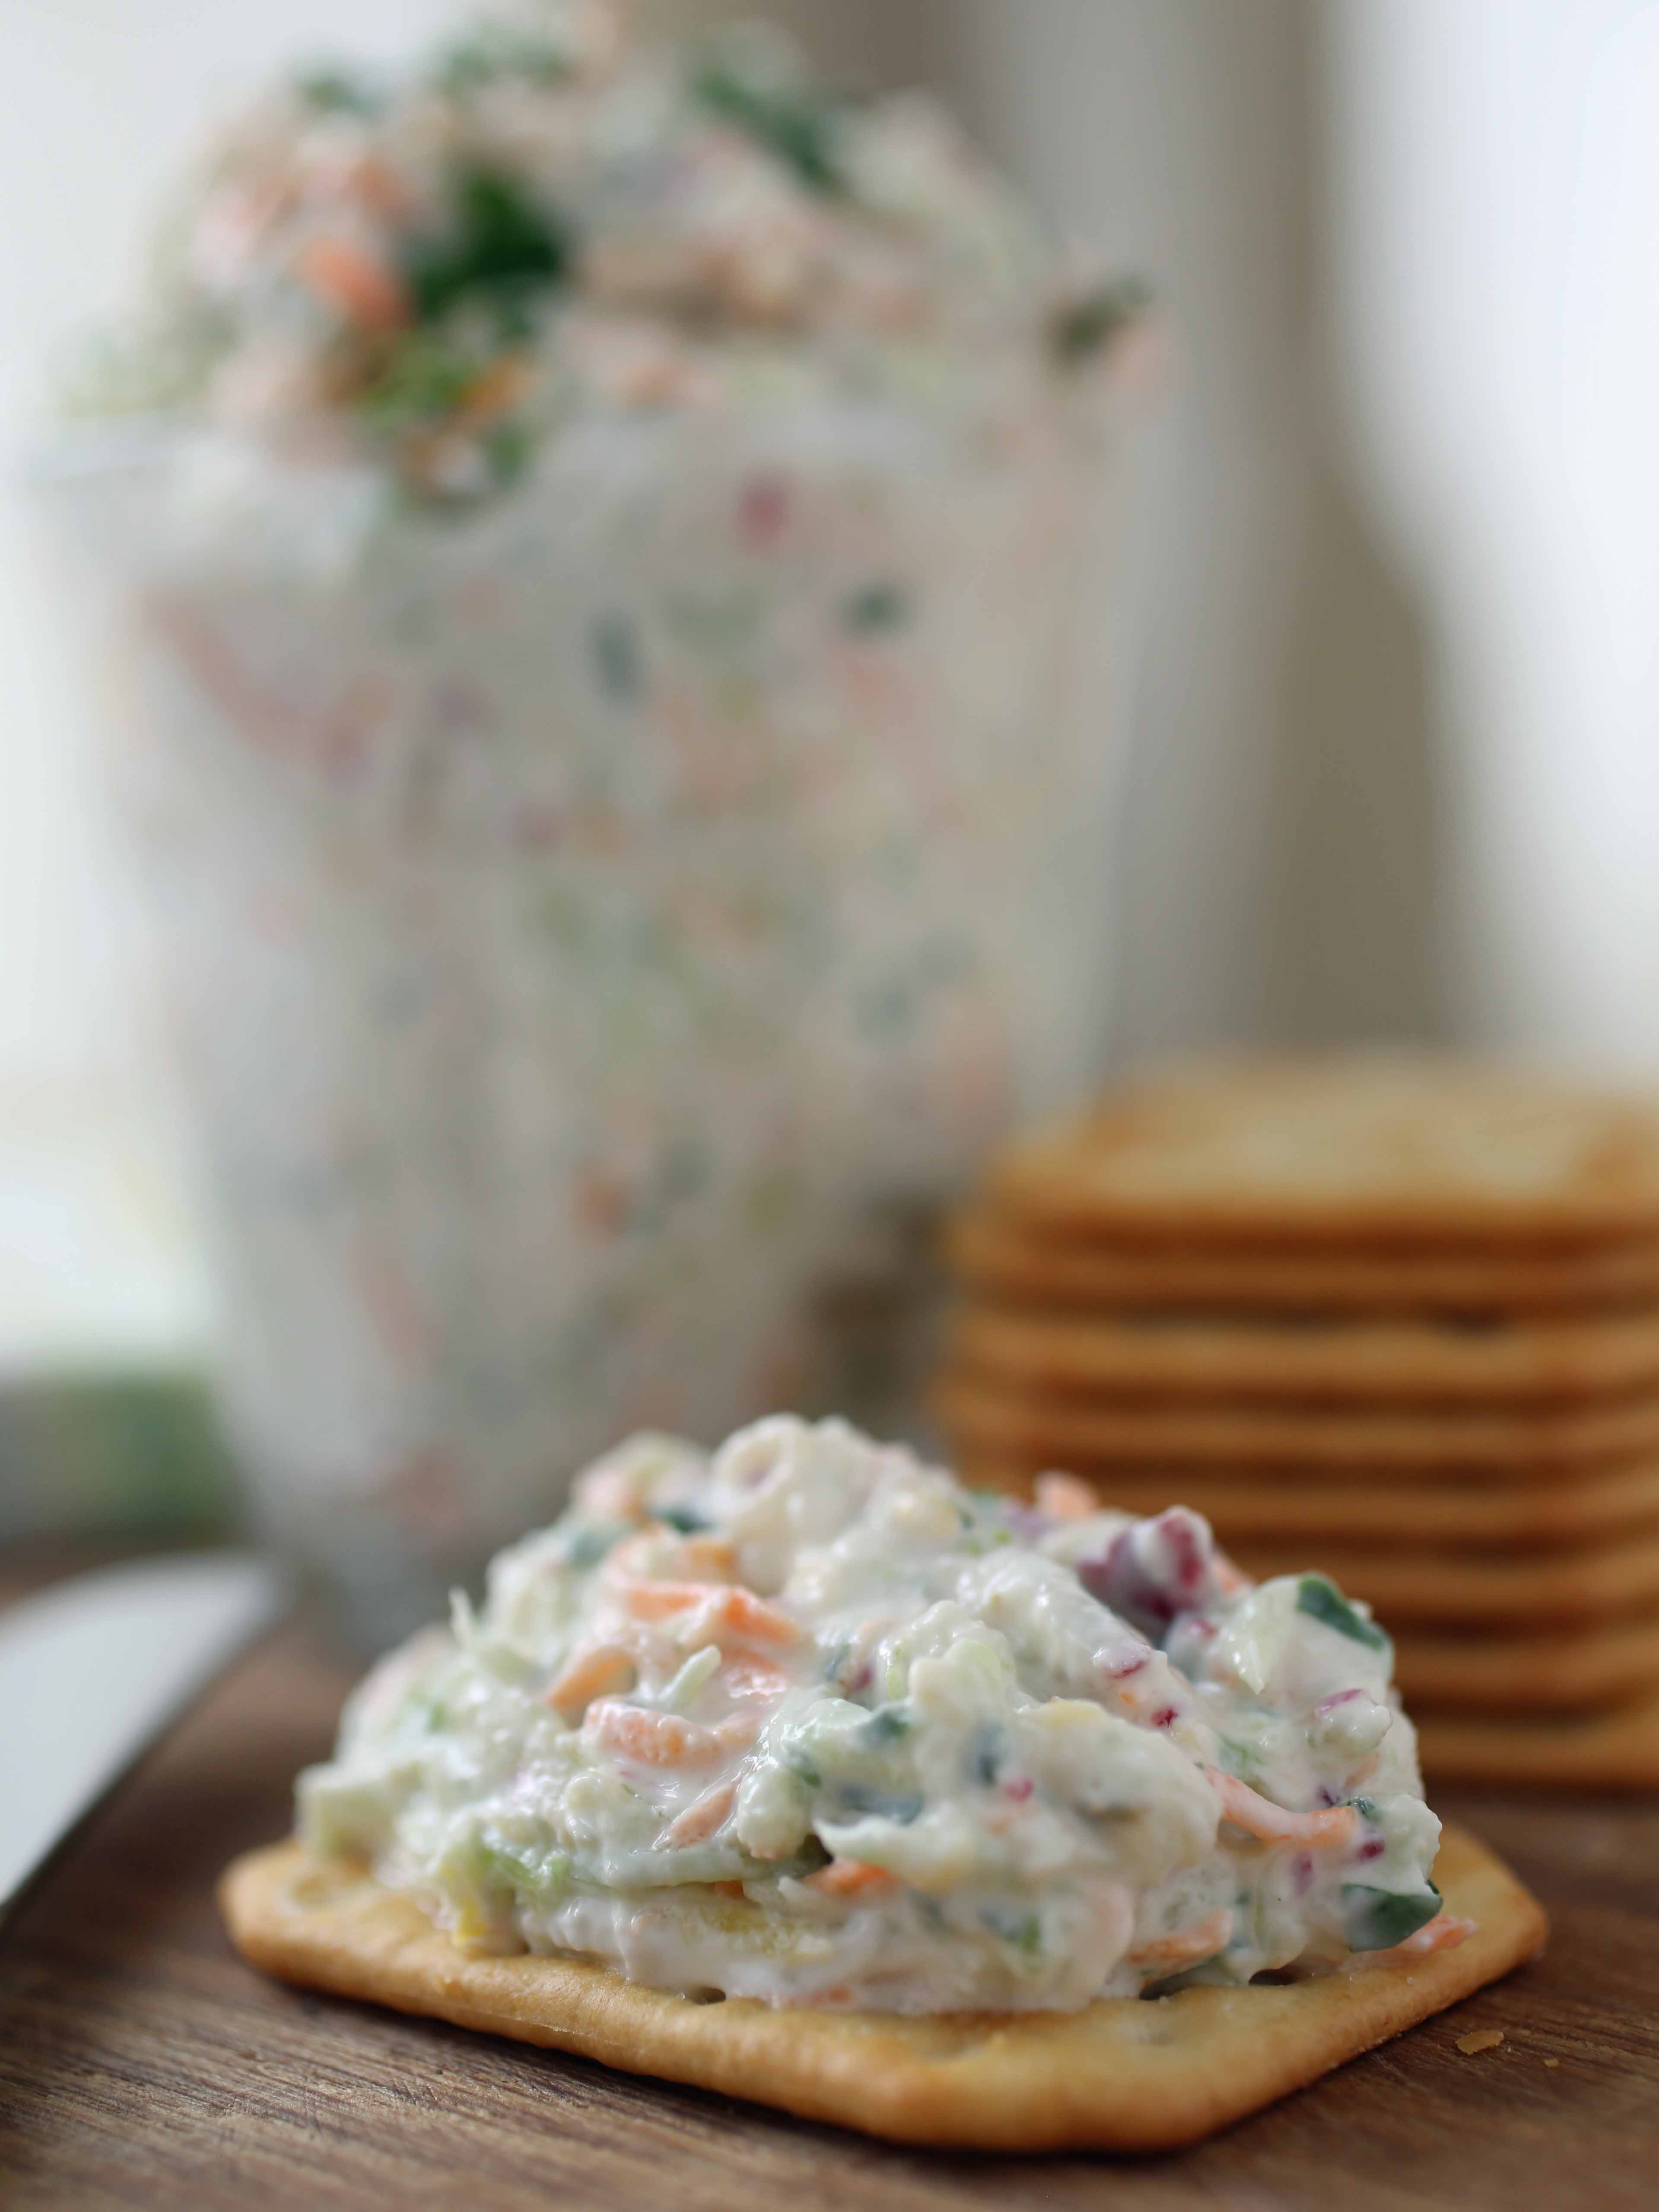 How To Make Vegetable Dip